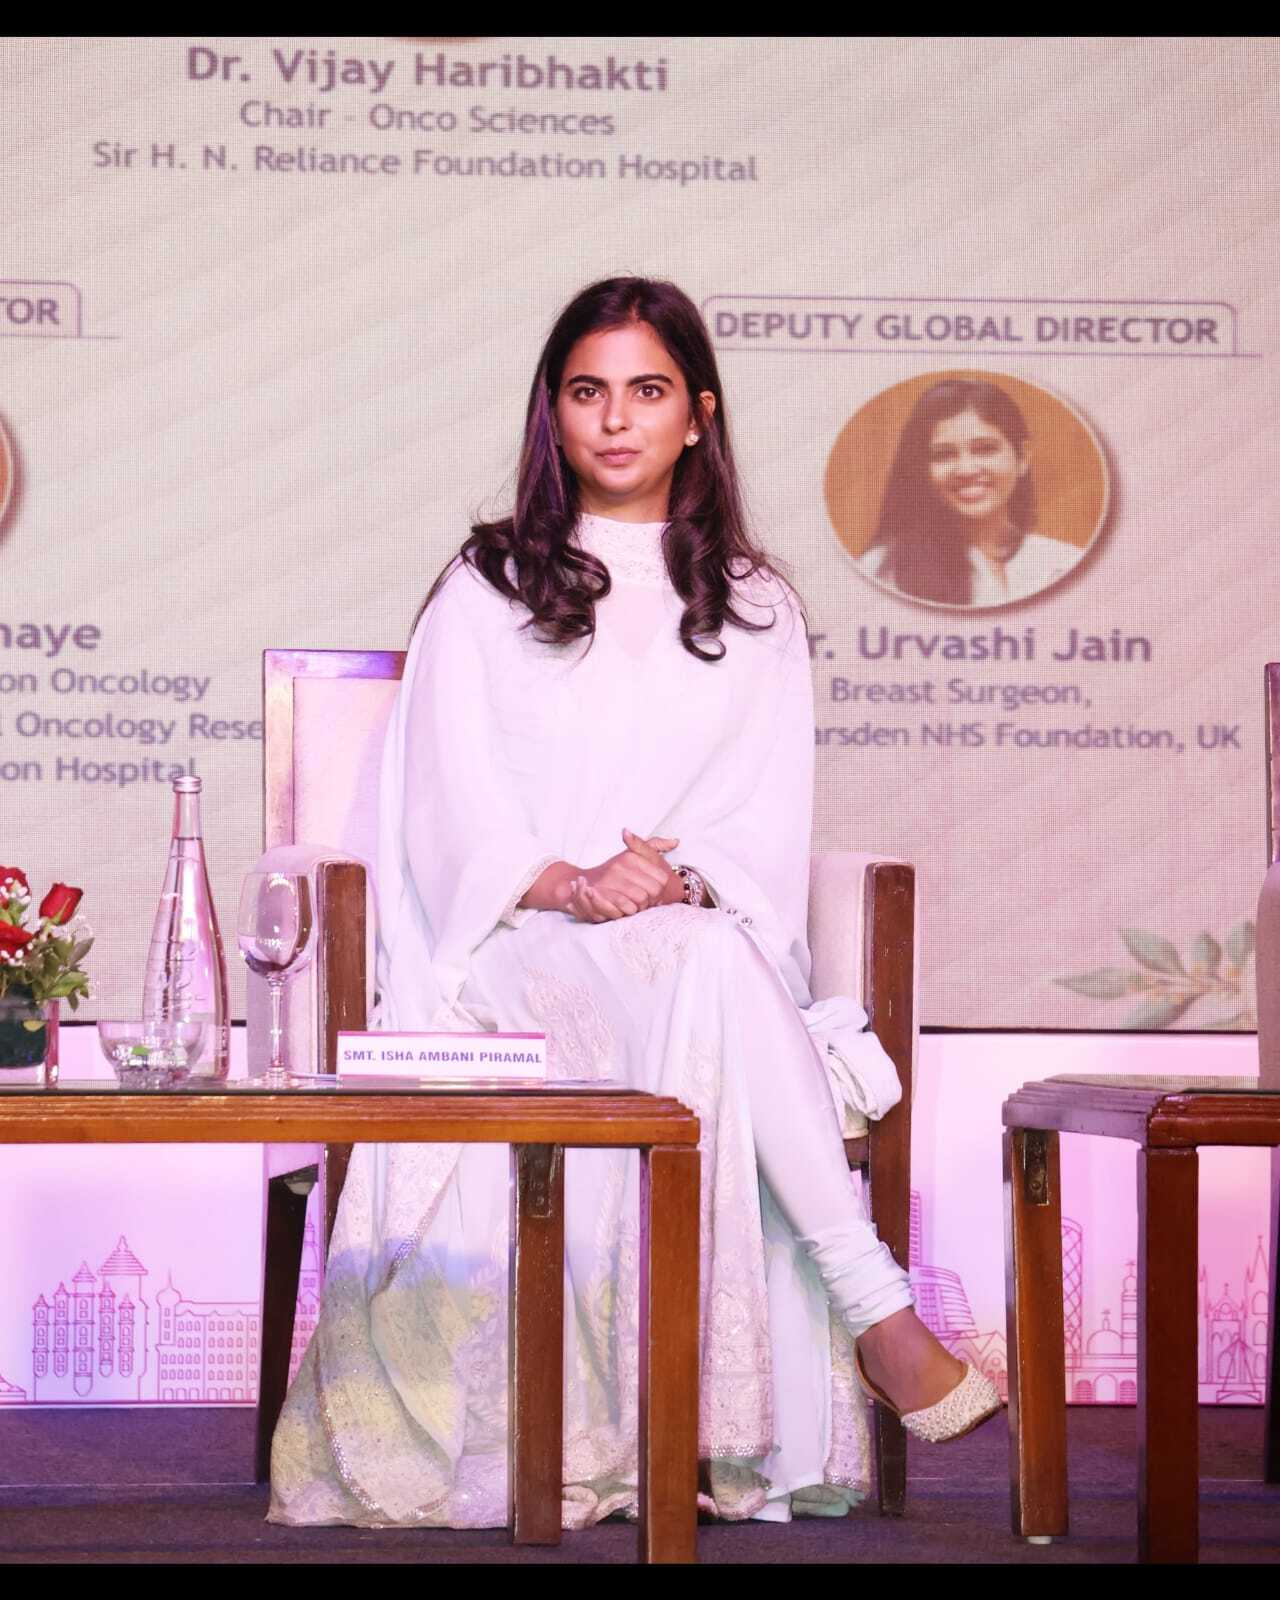 Isha Ambani was spotted at a book launch event in the city